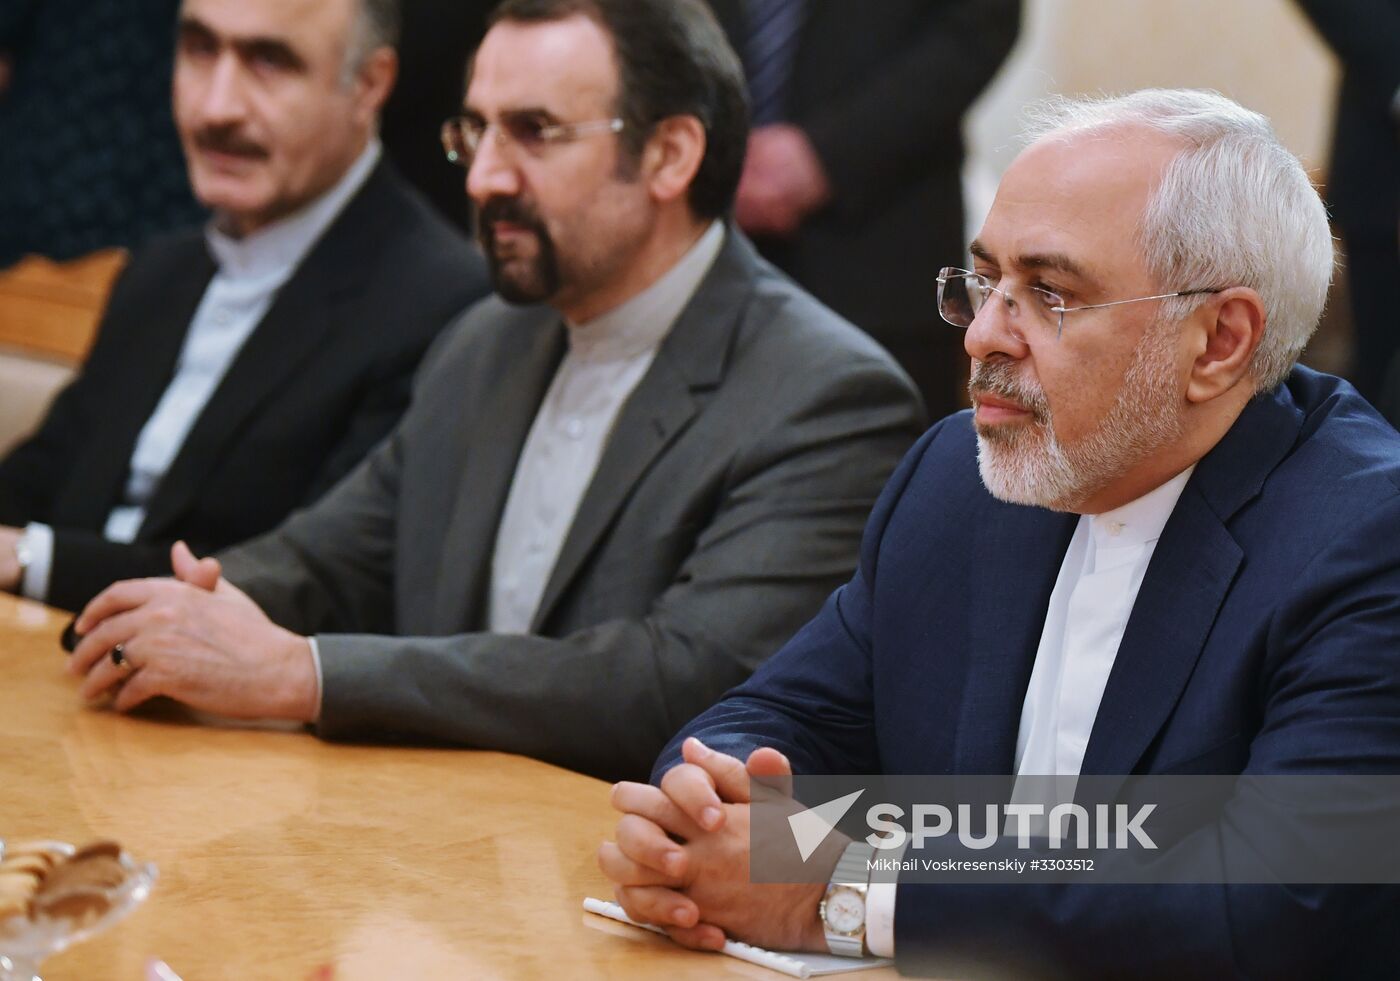 Foreign Minister Sergei Lavrov meets with Iranian Foreign Minister Mohammad Javad Zarif